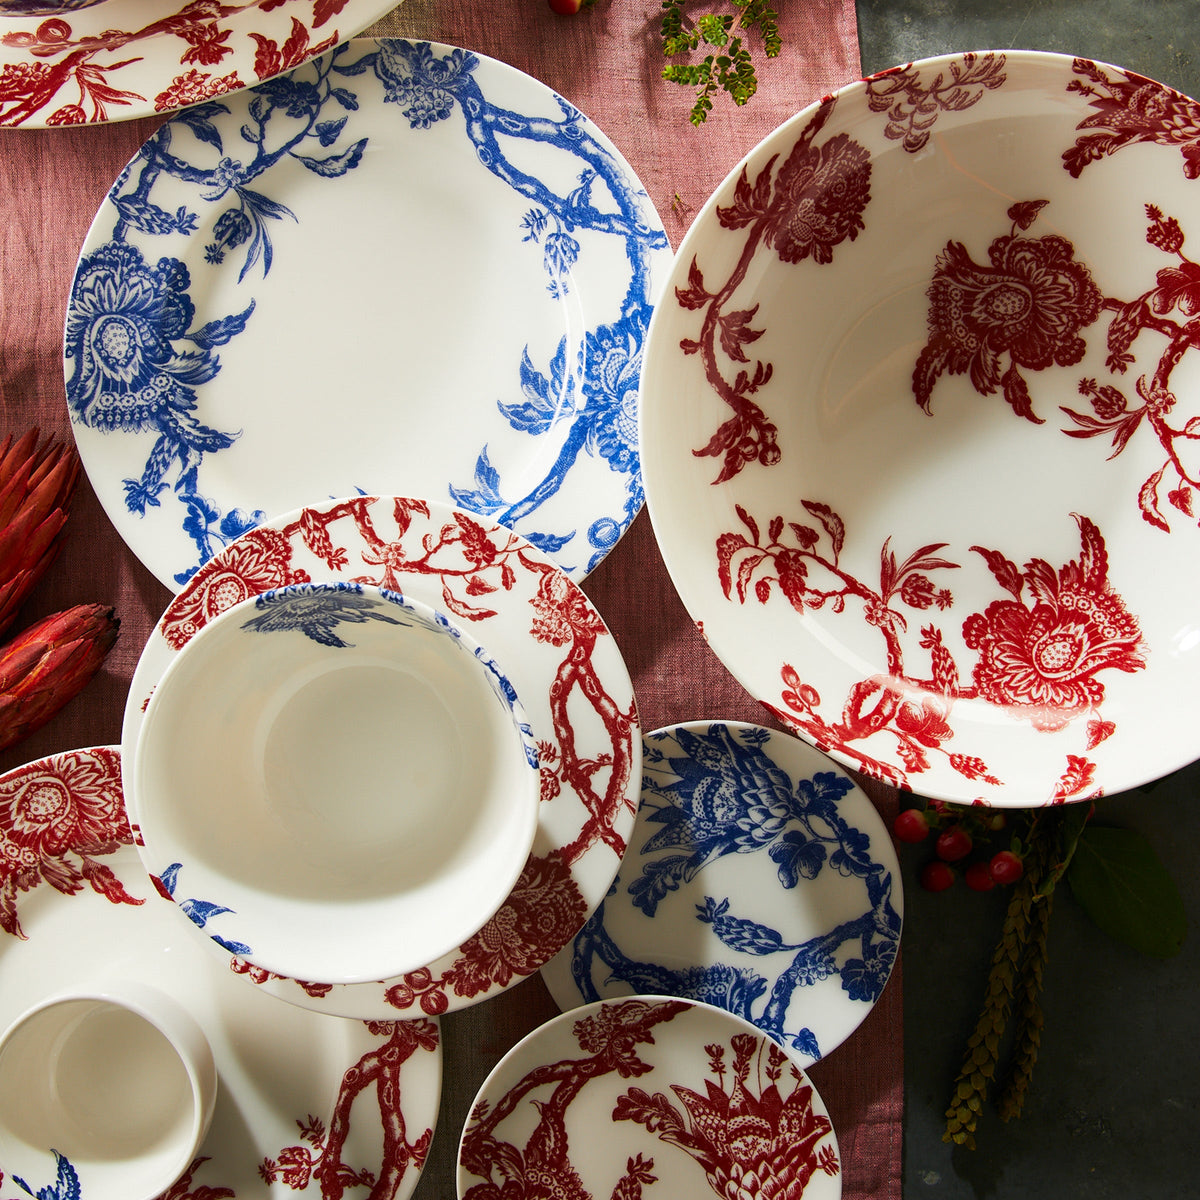 A collection of Arcadia Rimmed Dinner Plates by Caskata Artisanal Home with intricate blue and red graphic florals, arranged on a maroon tablecloth.